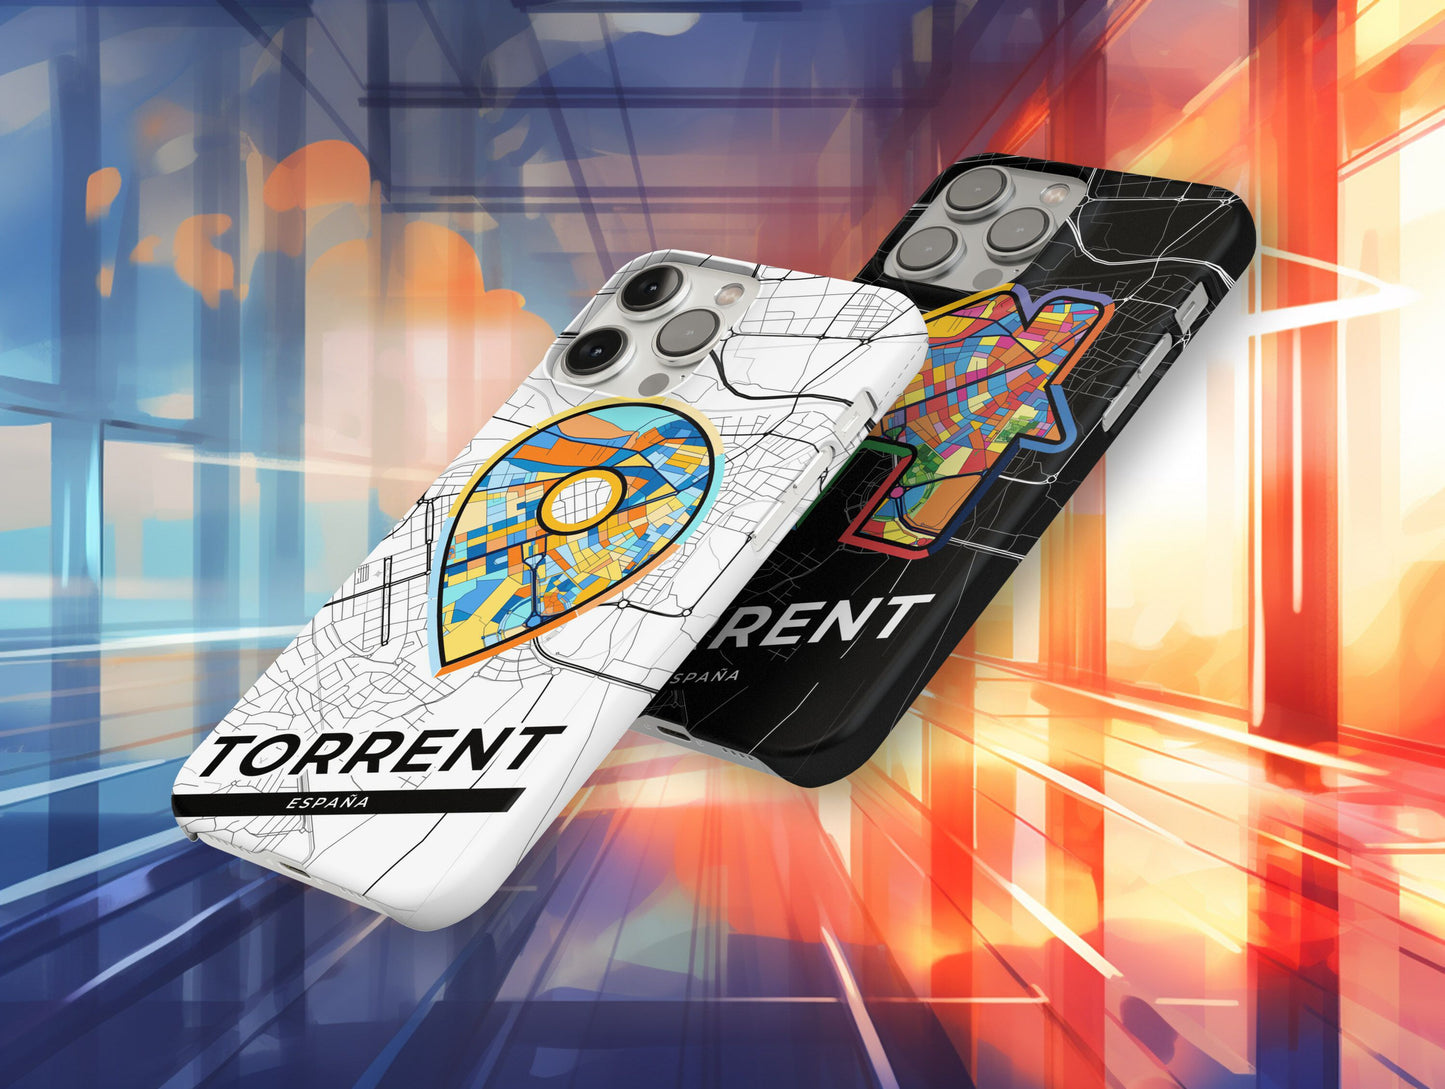 Torrent Spain slim phone case with colorful icon